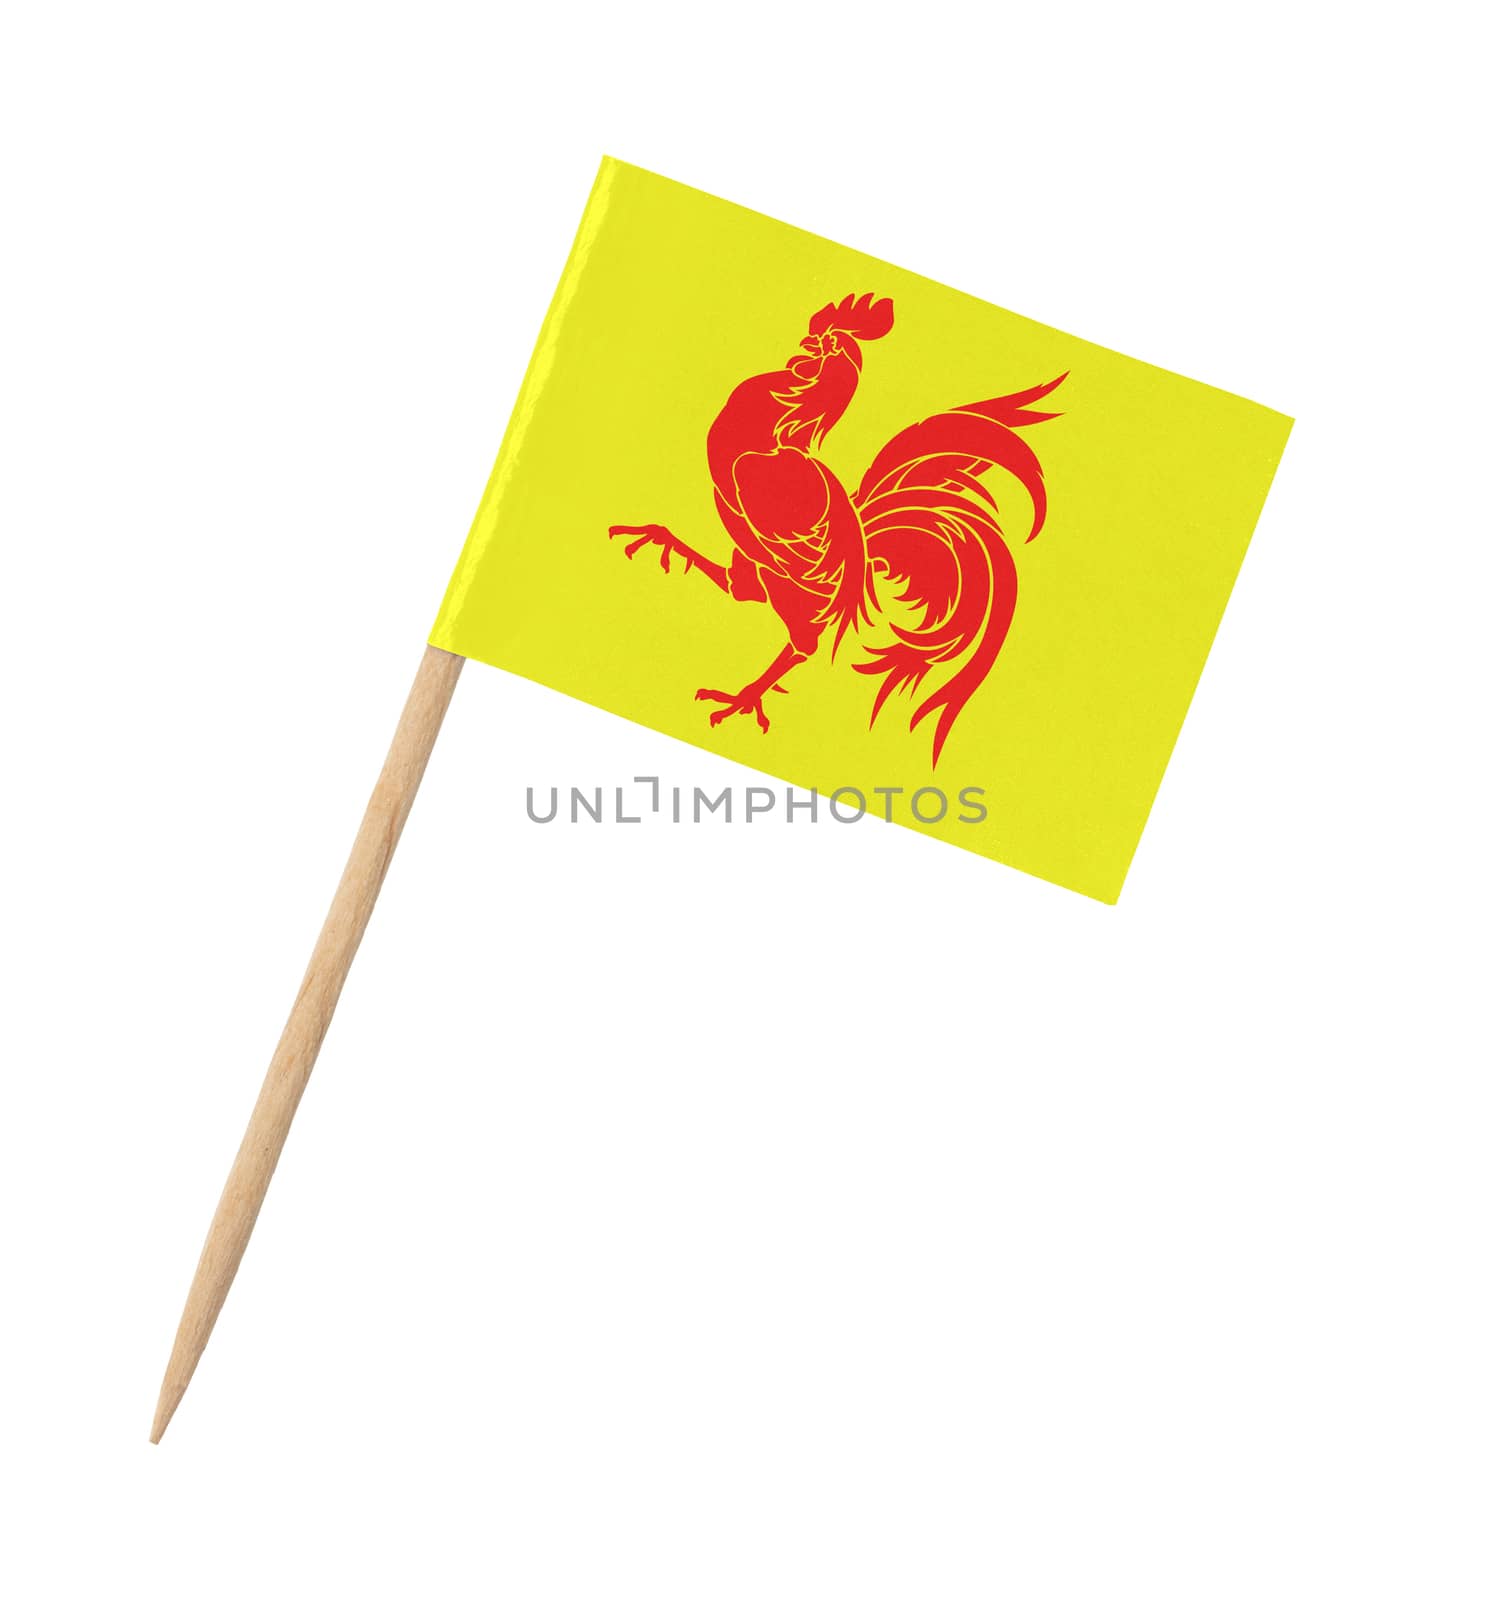 Small paper flag of Wallonia on wooden stick, isolated on white